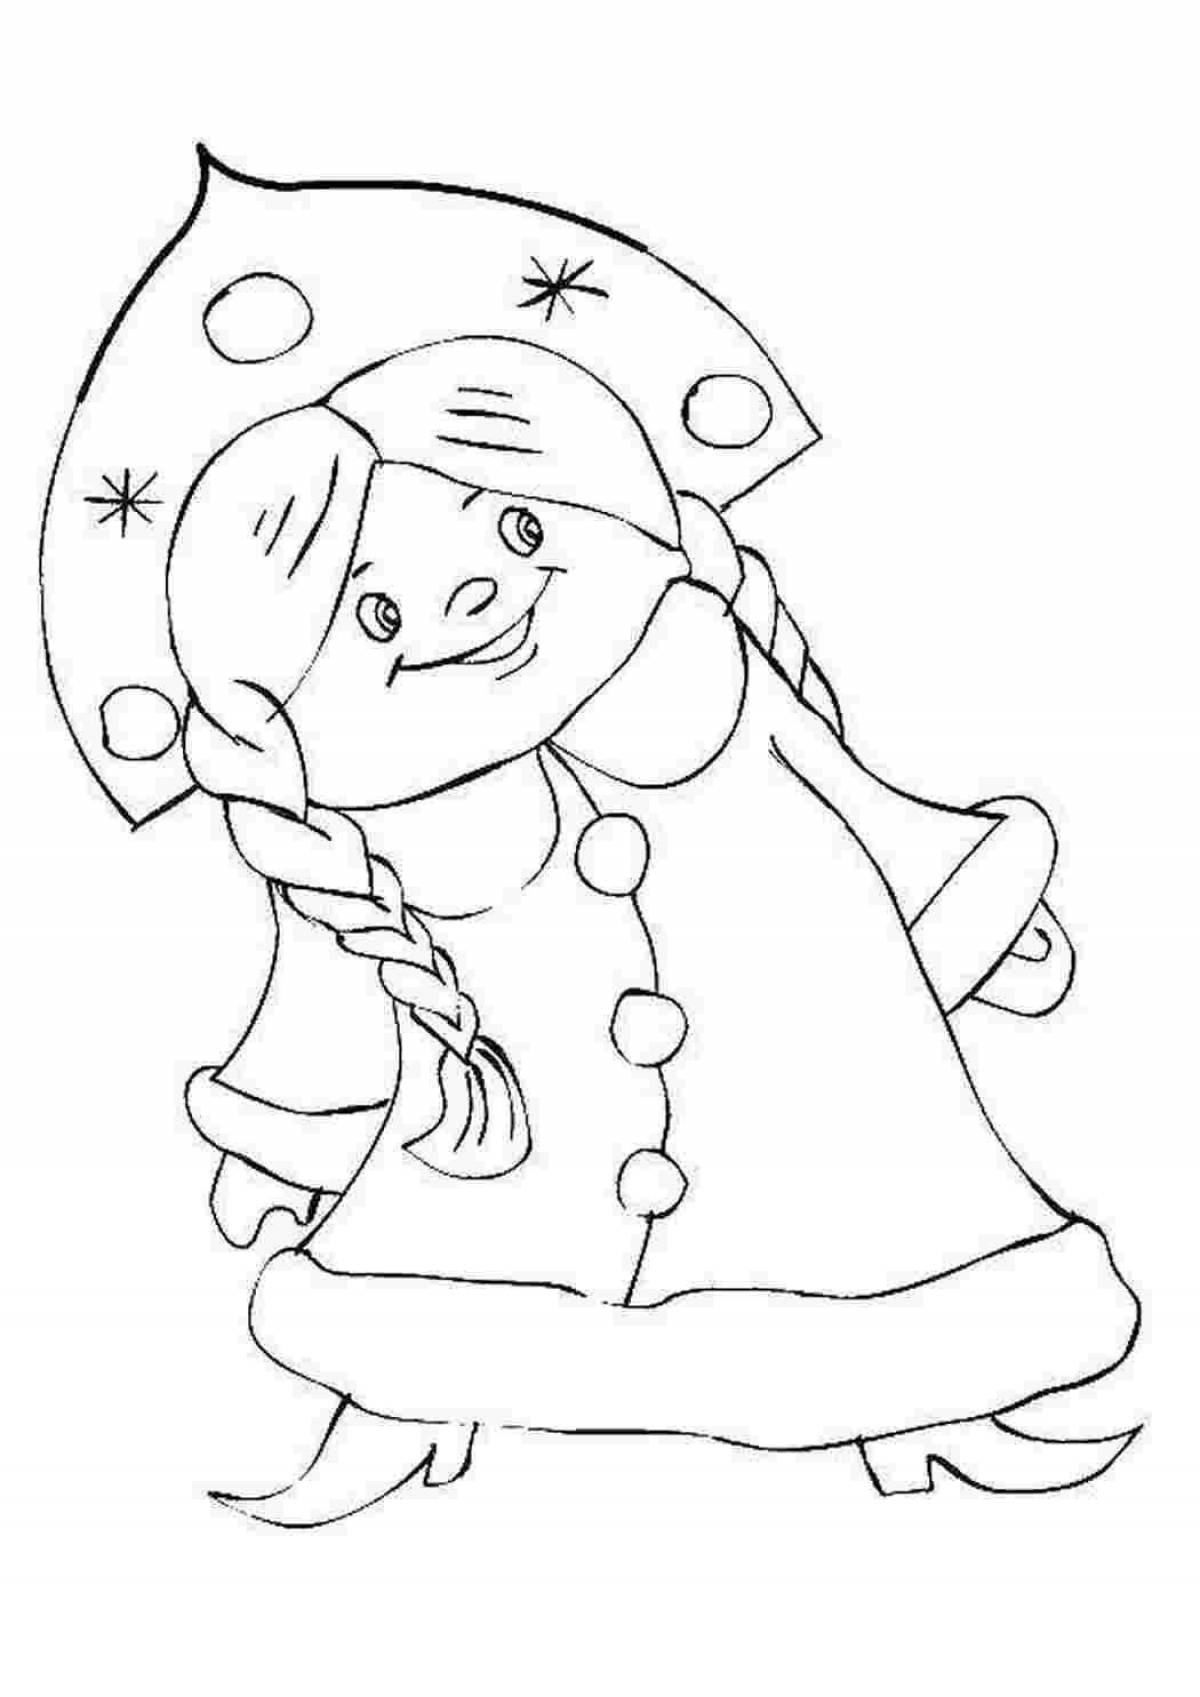 Coloring playful snow maiden